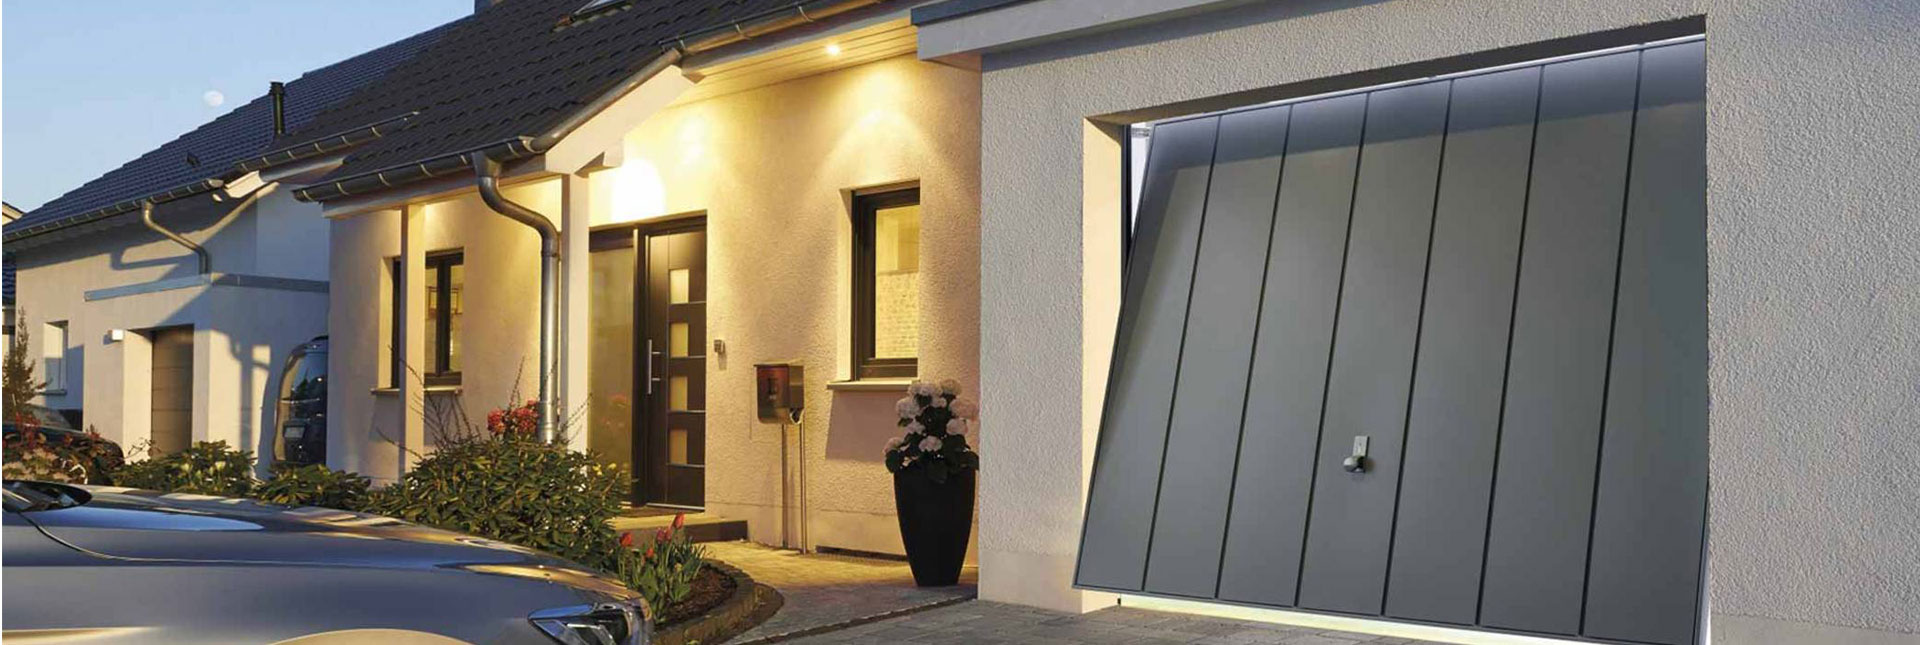 21FAQ: Can I automate an existing garage door?